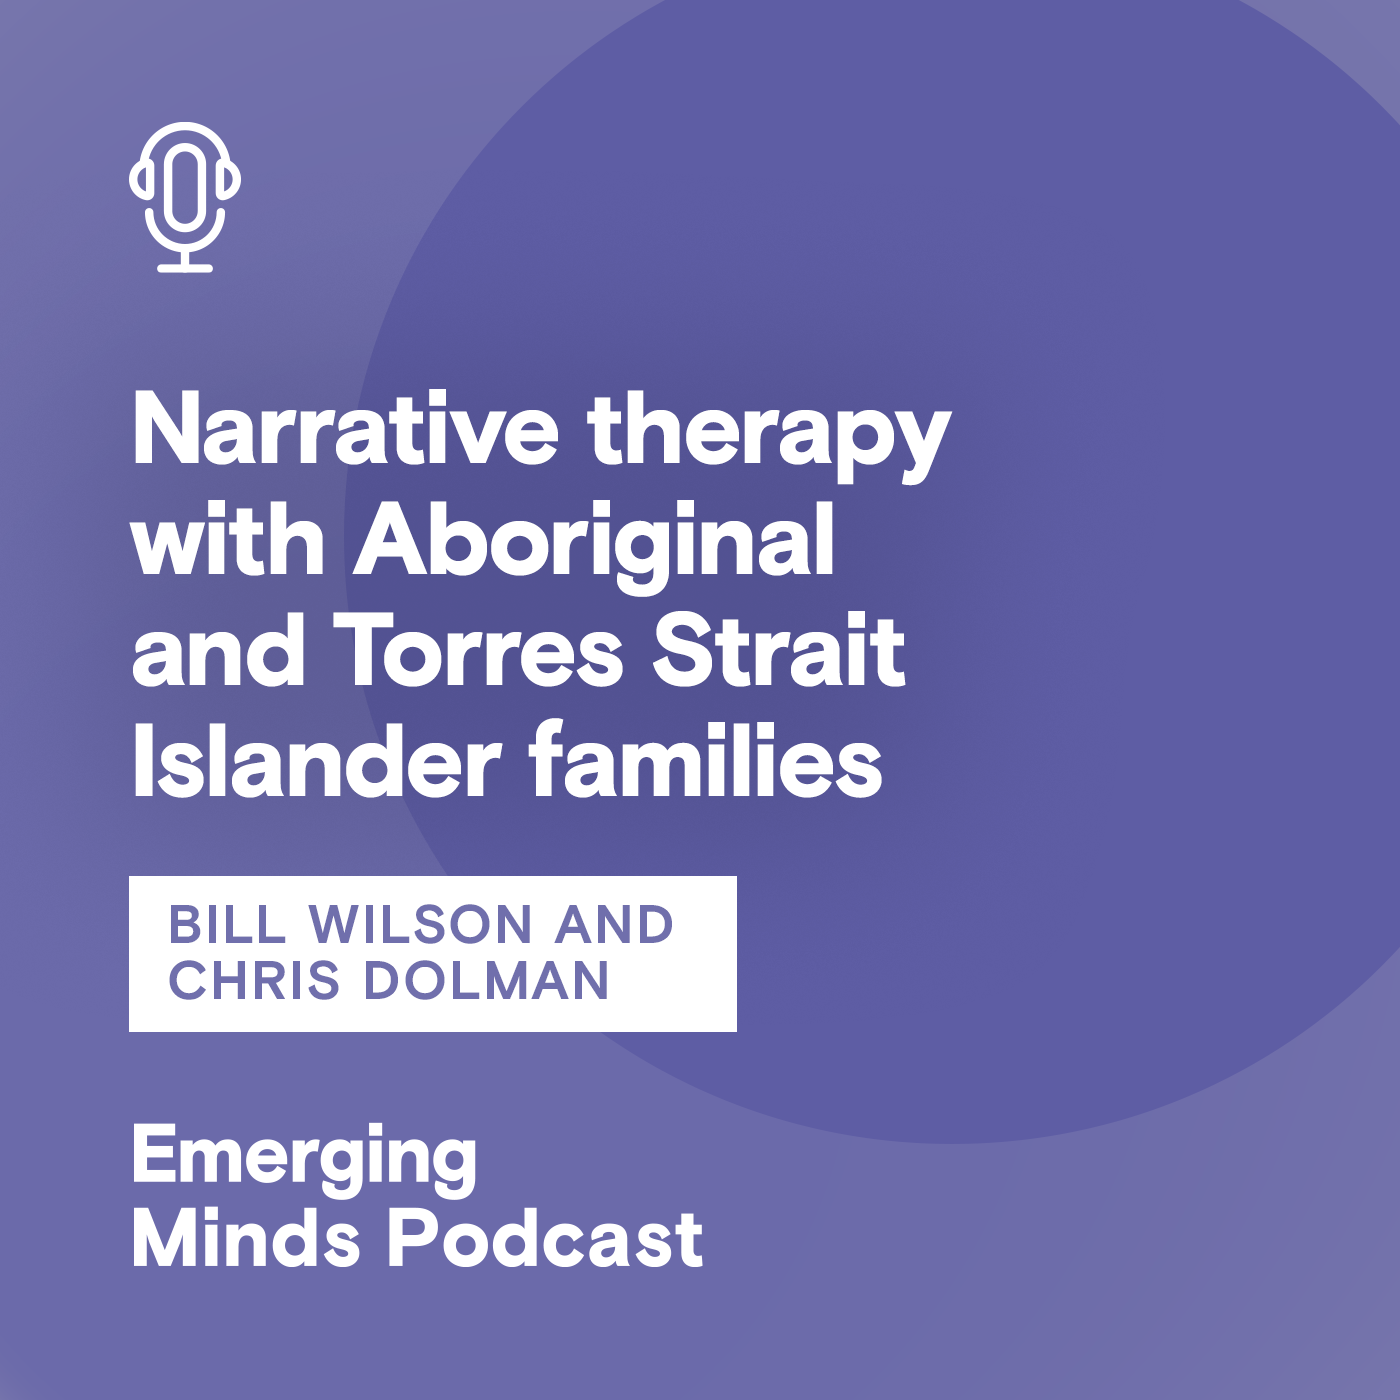 Narrative therapy with Aboriginal and Torres Strait Islander families